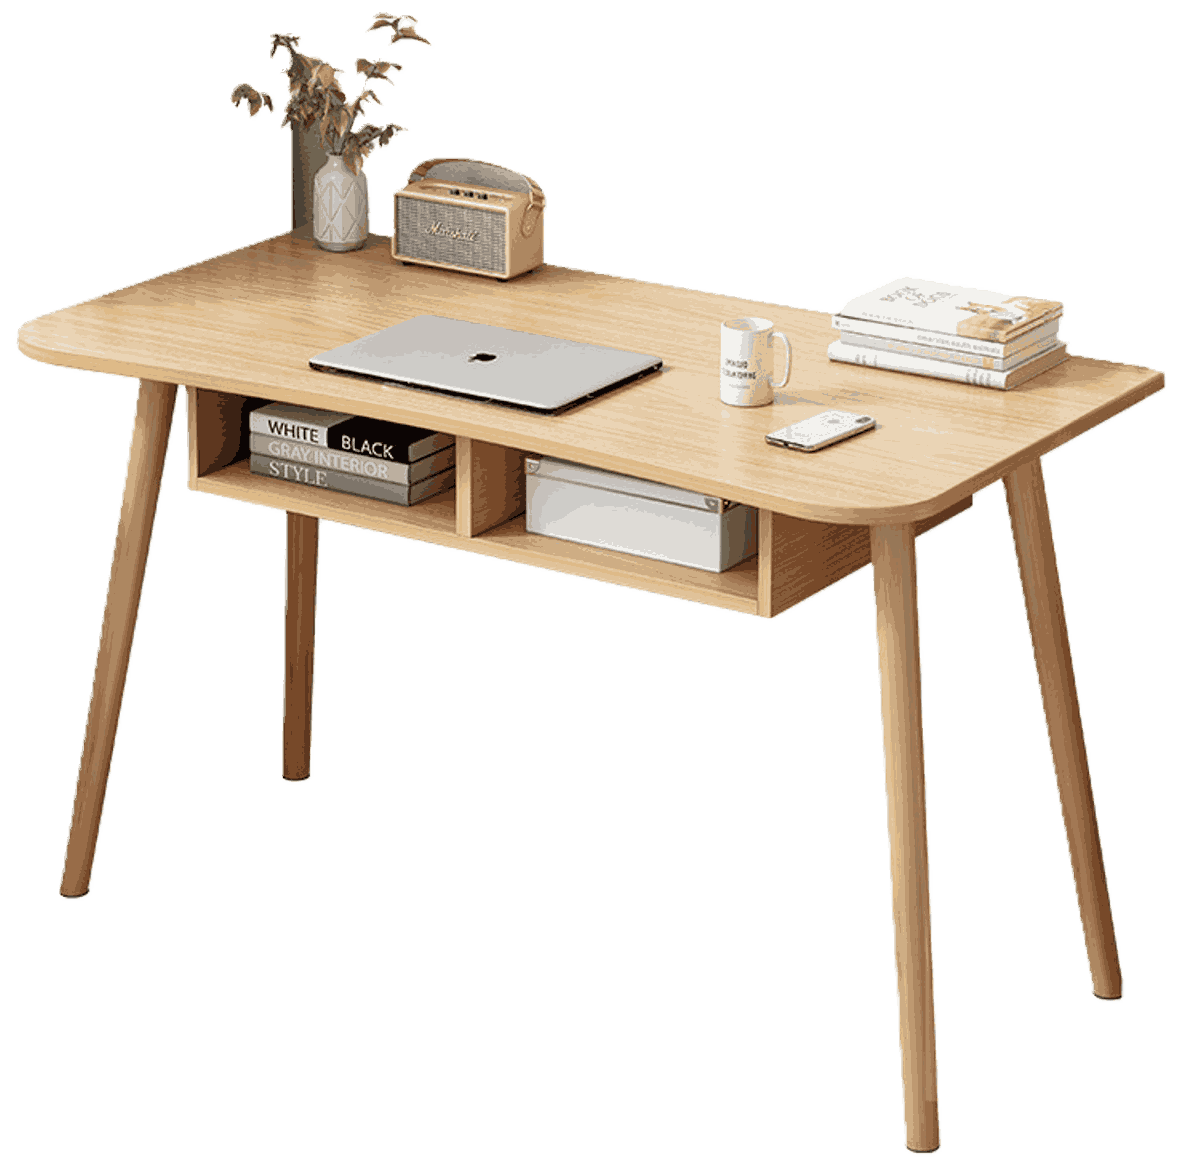 Wooden Study Tables with Chair: Comfort Meets Style A Perfect Combo